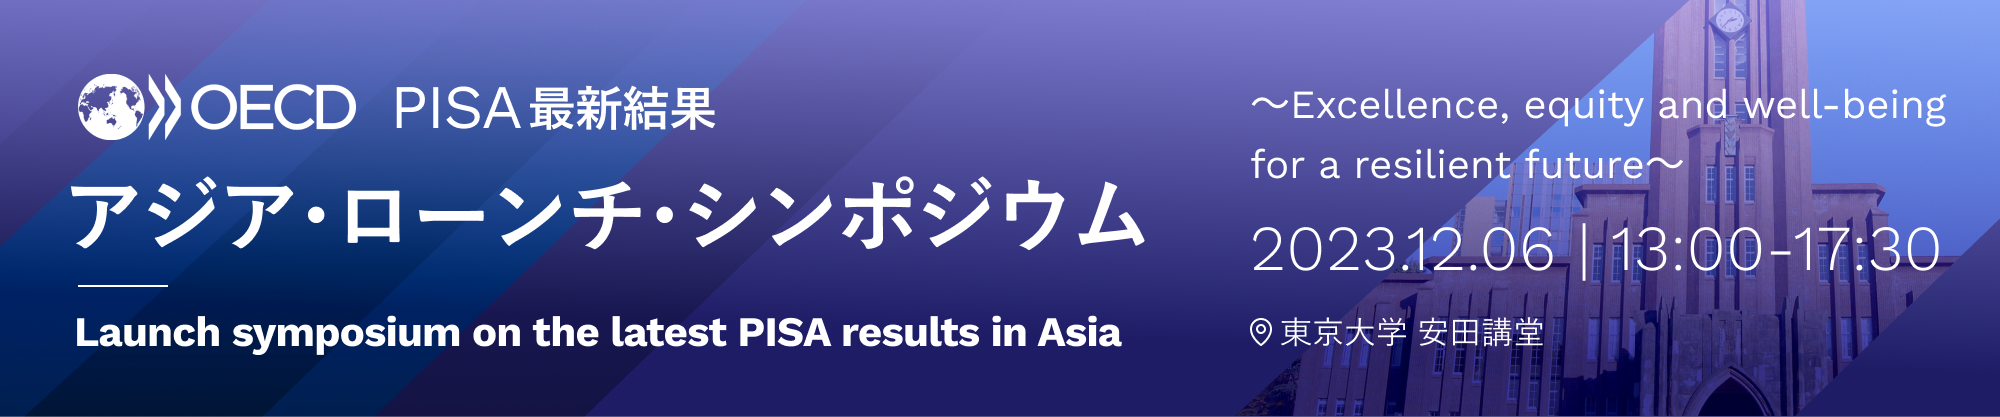 Launch symposium on the latest PISA results in Asia～Excellence, equity and well-being for a resilient future～のバナー画像